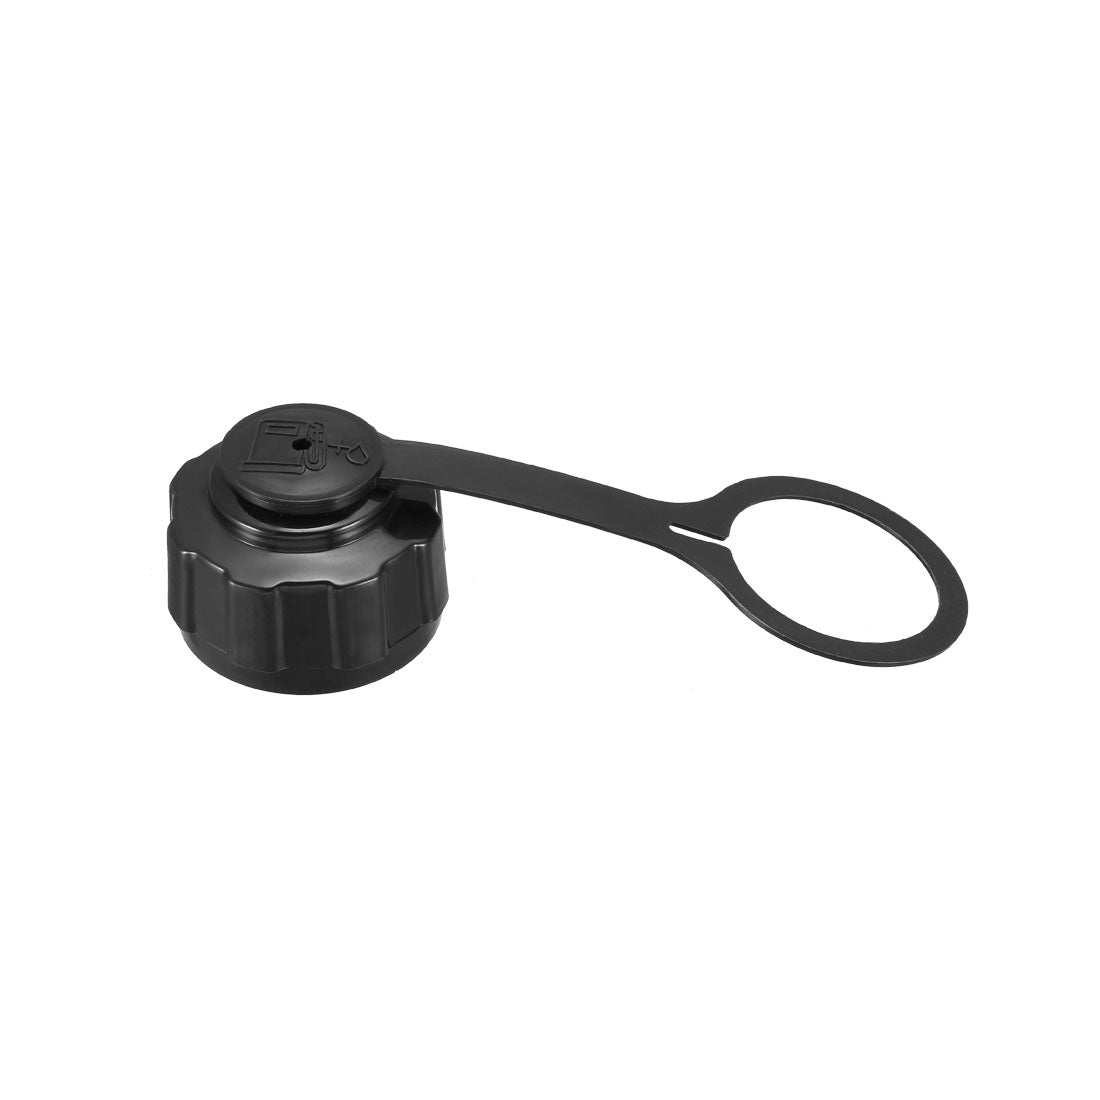 uxcell Uxcell 17620-ZM3-063 Fuel Tank Cap for Brushcutter Lawn Mowers Engine